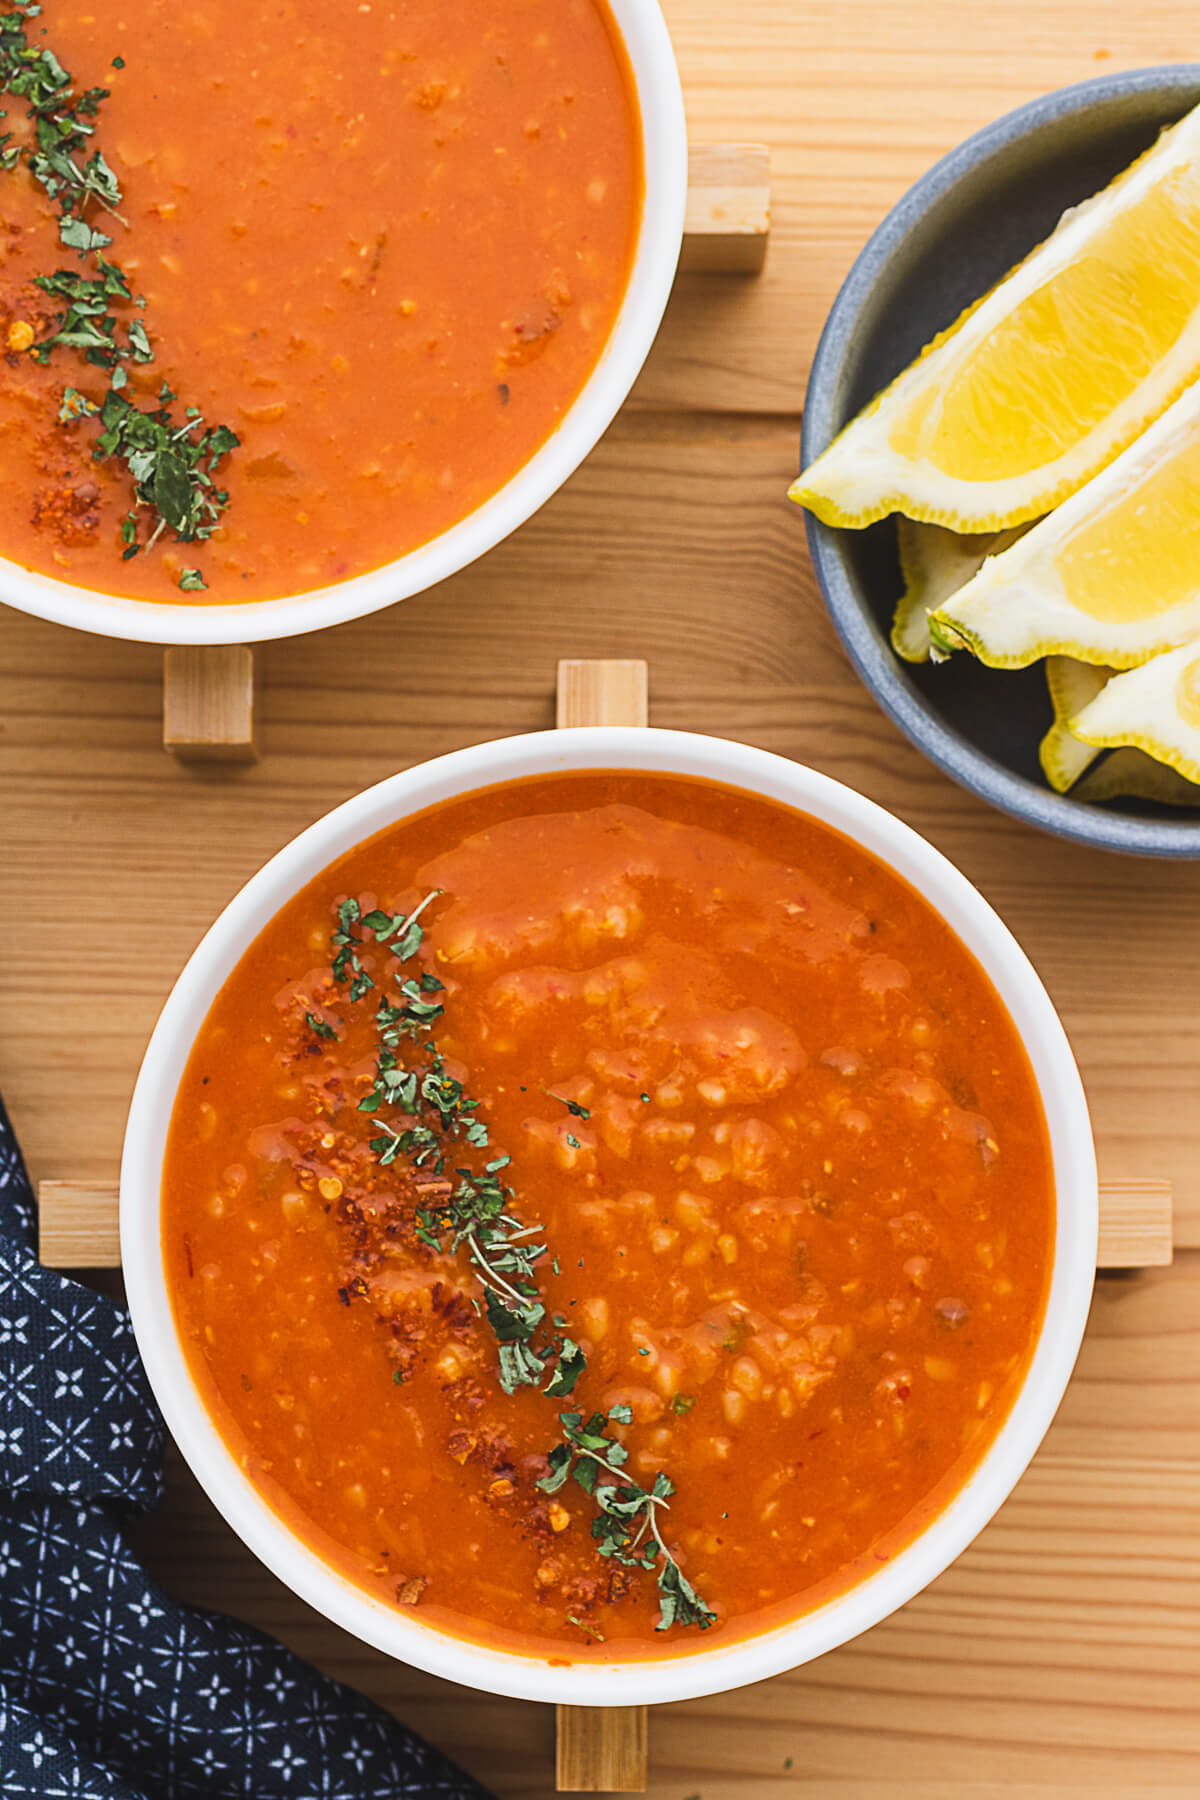 Two white bowls filled with fiery red Turkish Lentil Soup garnished with dried mint and red pepper flakes surrounded by lemon wedges and bread.